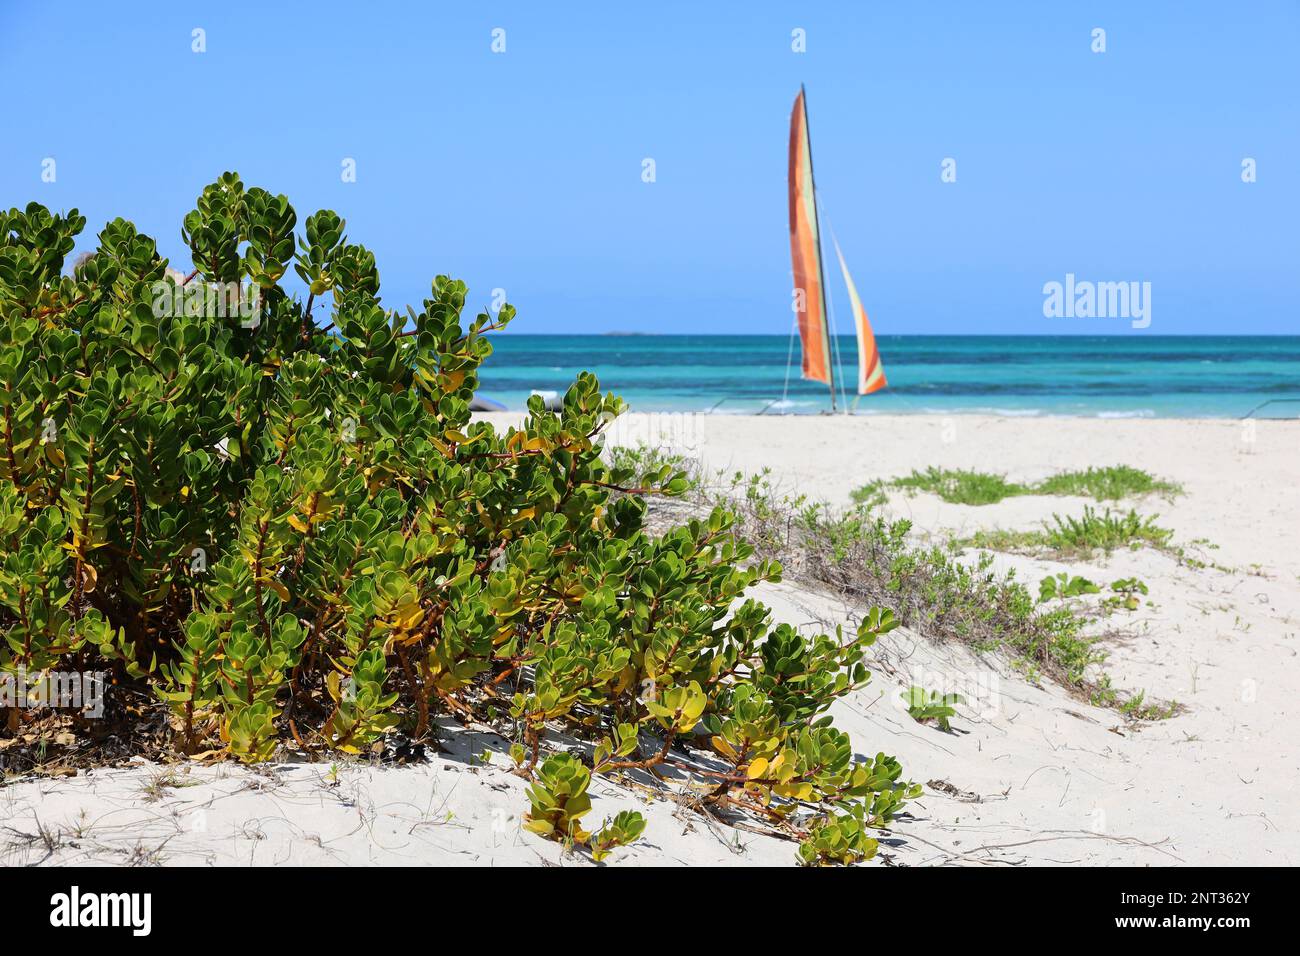 View to tropical plants on a sandy beach and blue ocean with sailboat. Holidays on a Caribbean island Stock Photo